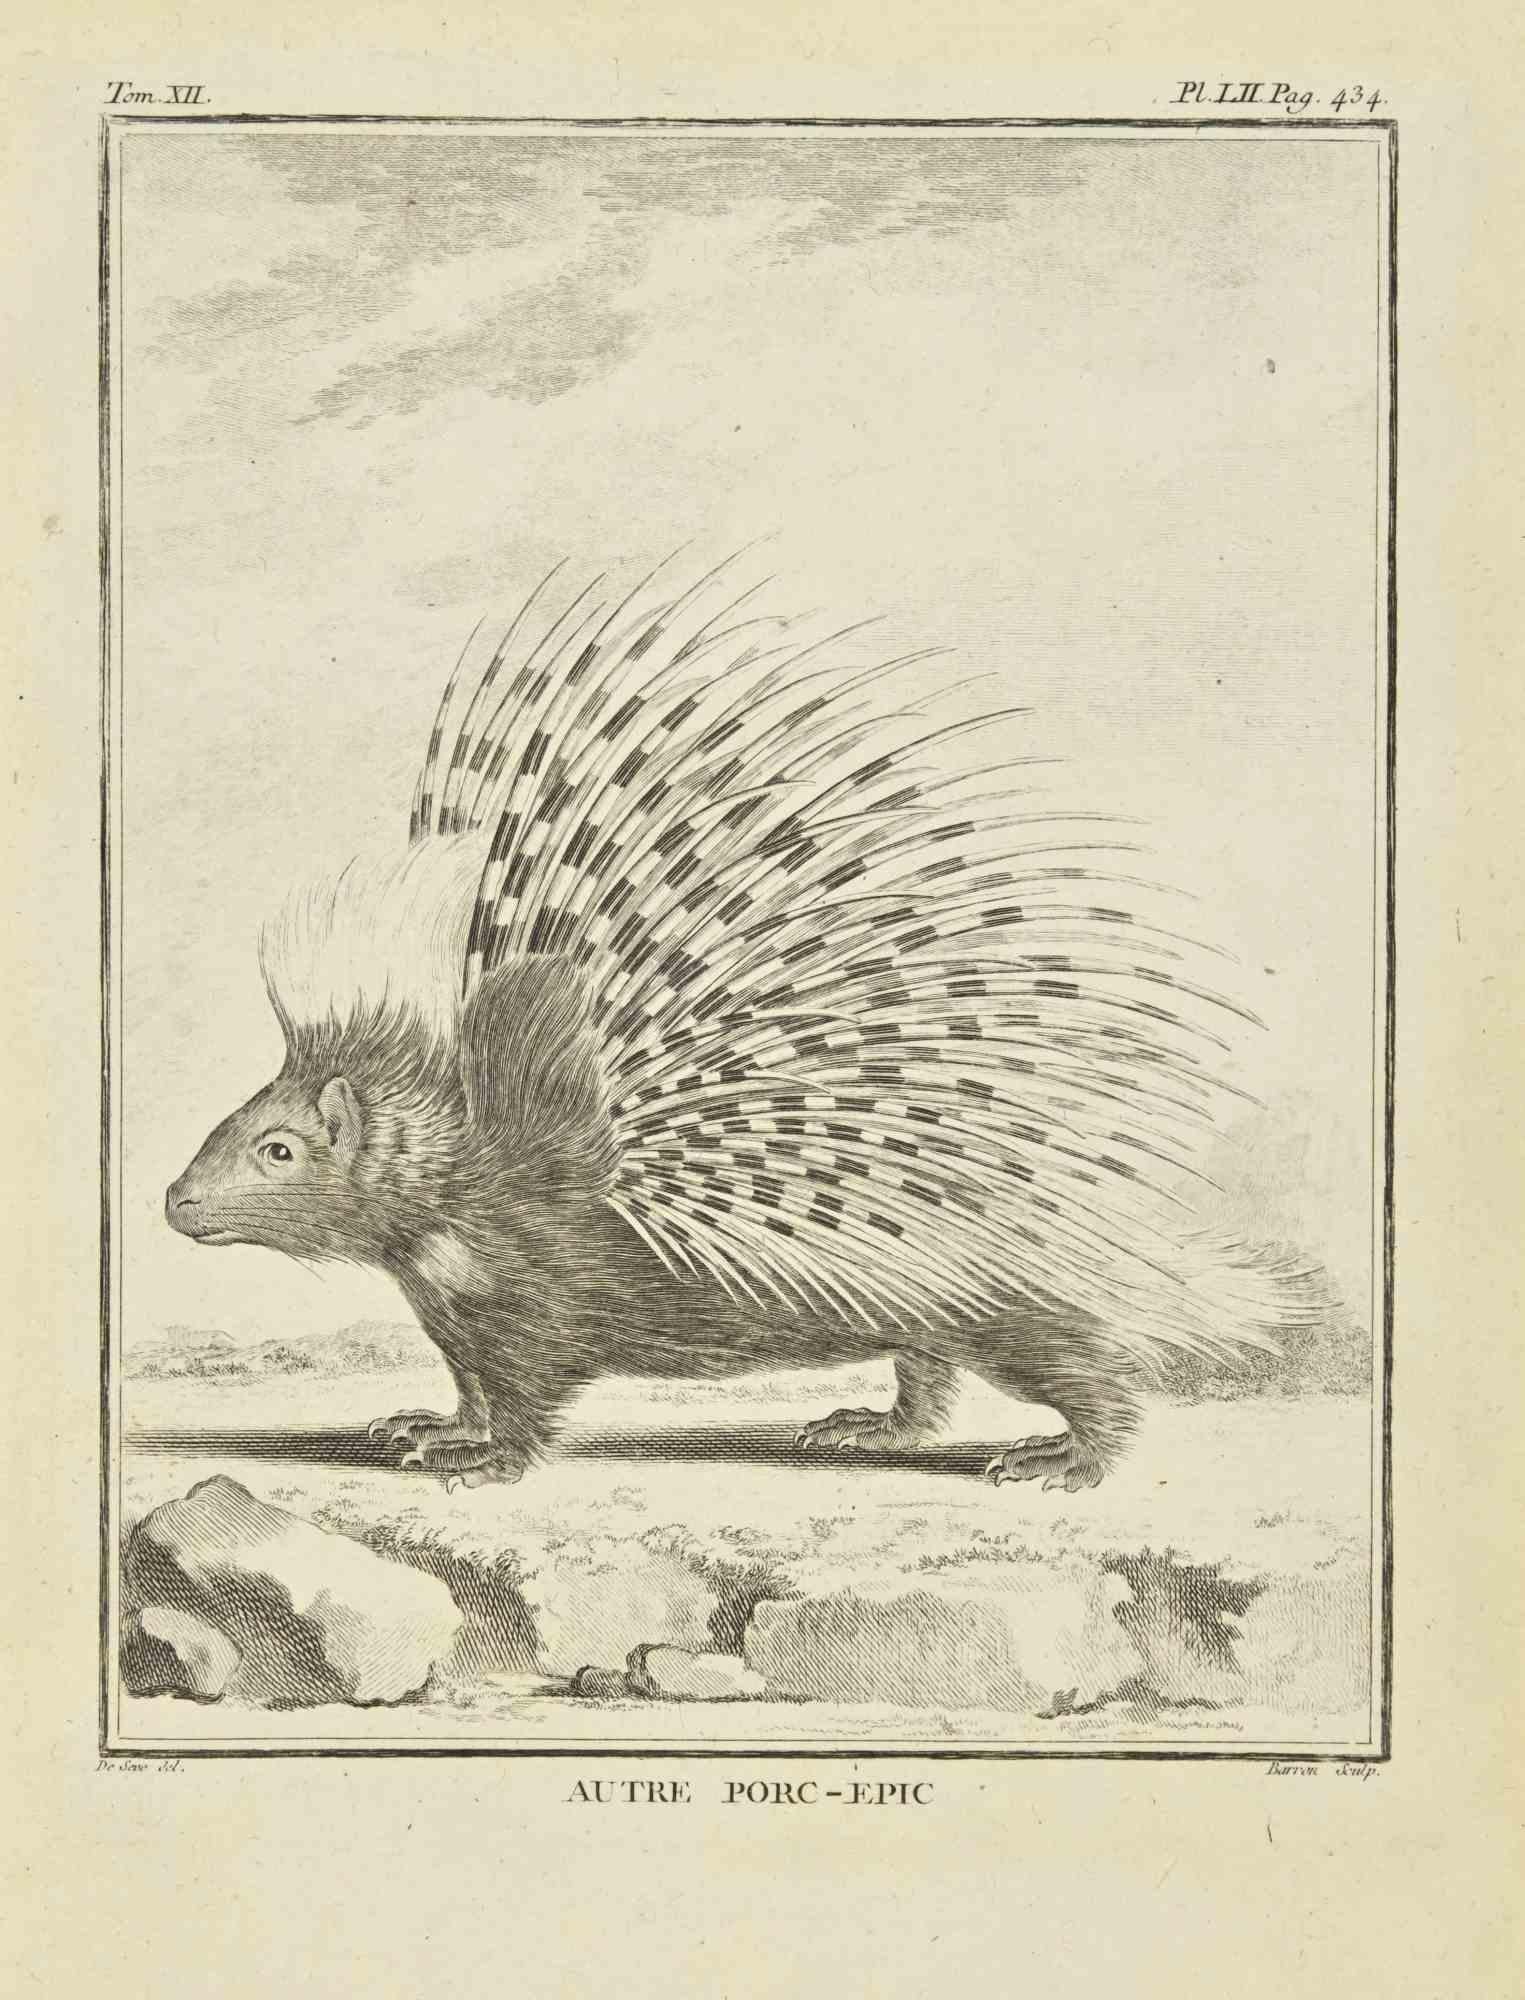 Porcupine is an etching realized by Jacques Baron in 1771.

It belongs to the suite "Histoire Naturelle de Buffon".

The Artist's signature is engraved lower right.

Good conditions